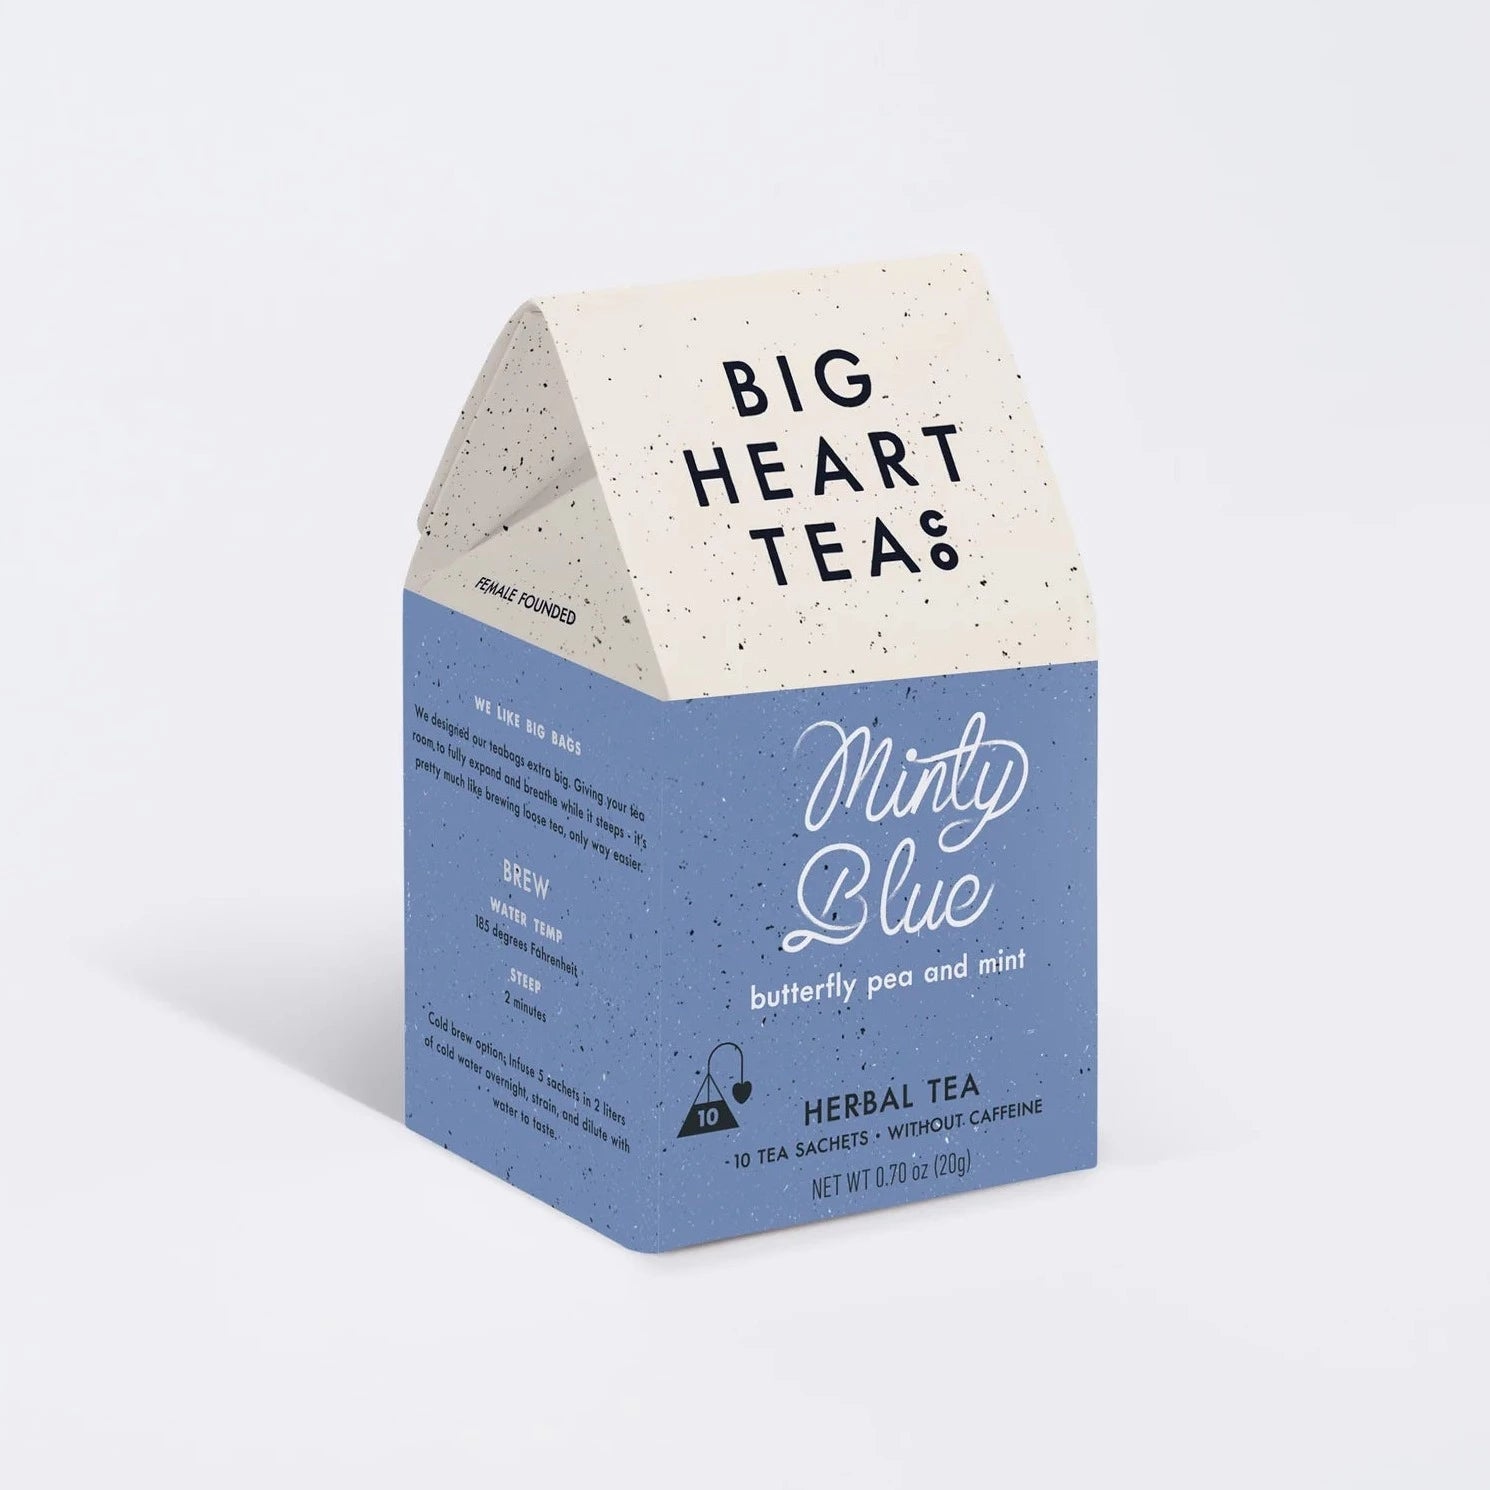 Minty Blue Tea packaging on white background.